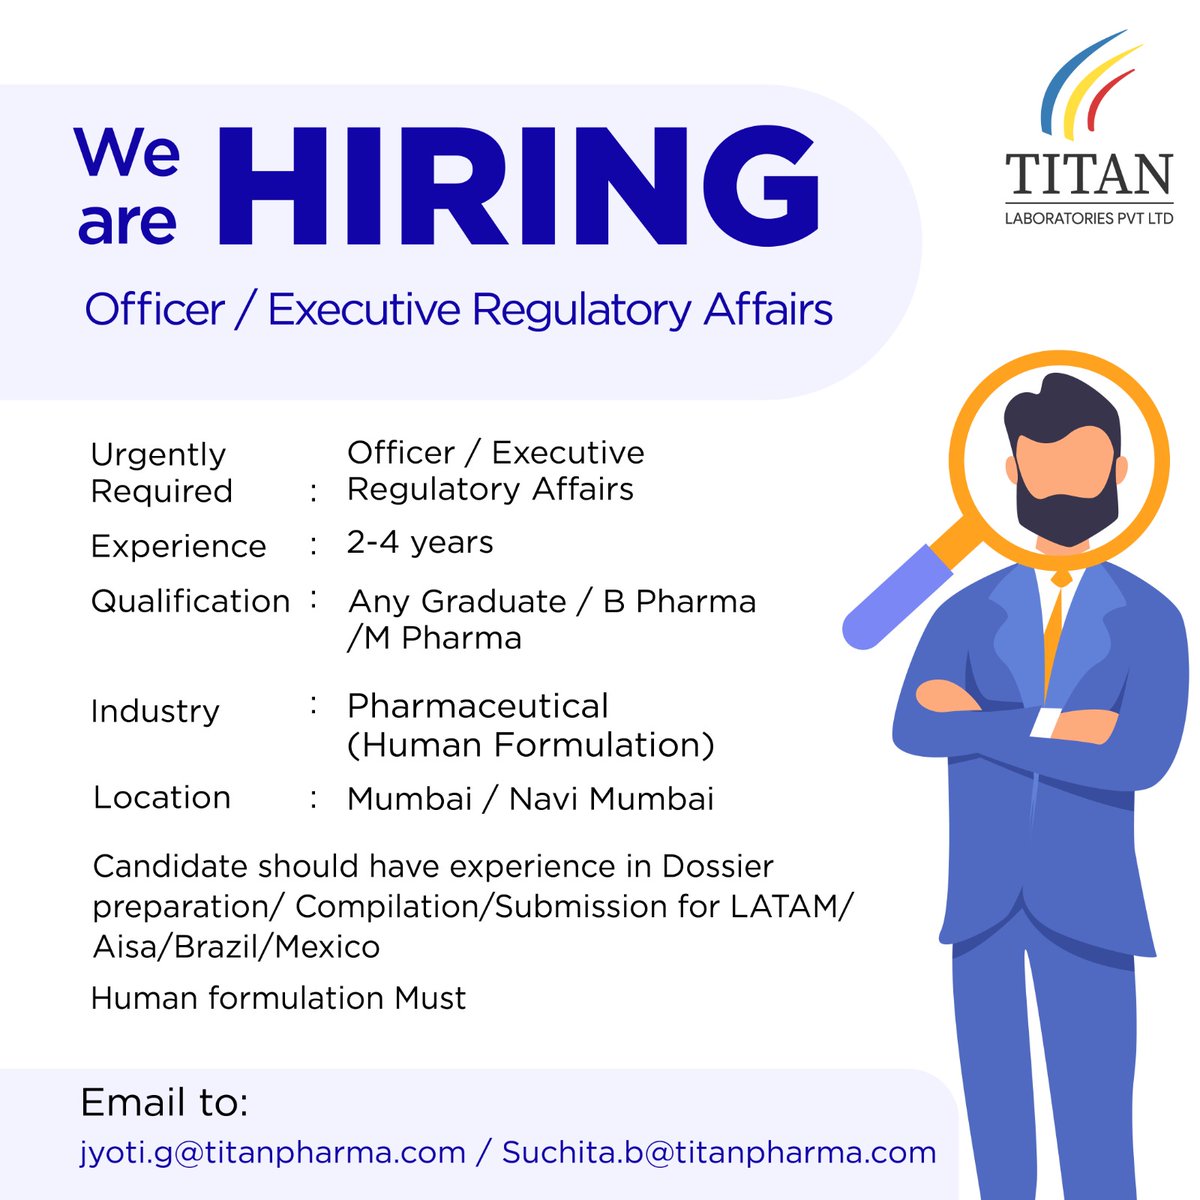 Titan Laboratories is looking for an Experienced person for an Executive Regulatory Affairs/ Officer position to join the family.

#india #manufacturing #jobopenings #pharmaceutical #mumbaijob #indiajob #jobs #hiring #jobsearch #careers #resume #vacancy #jobseekers #jobseeker